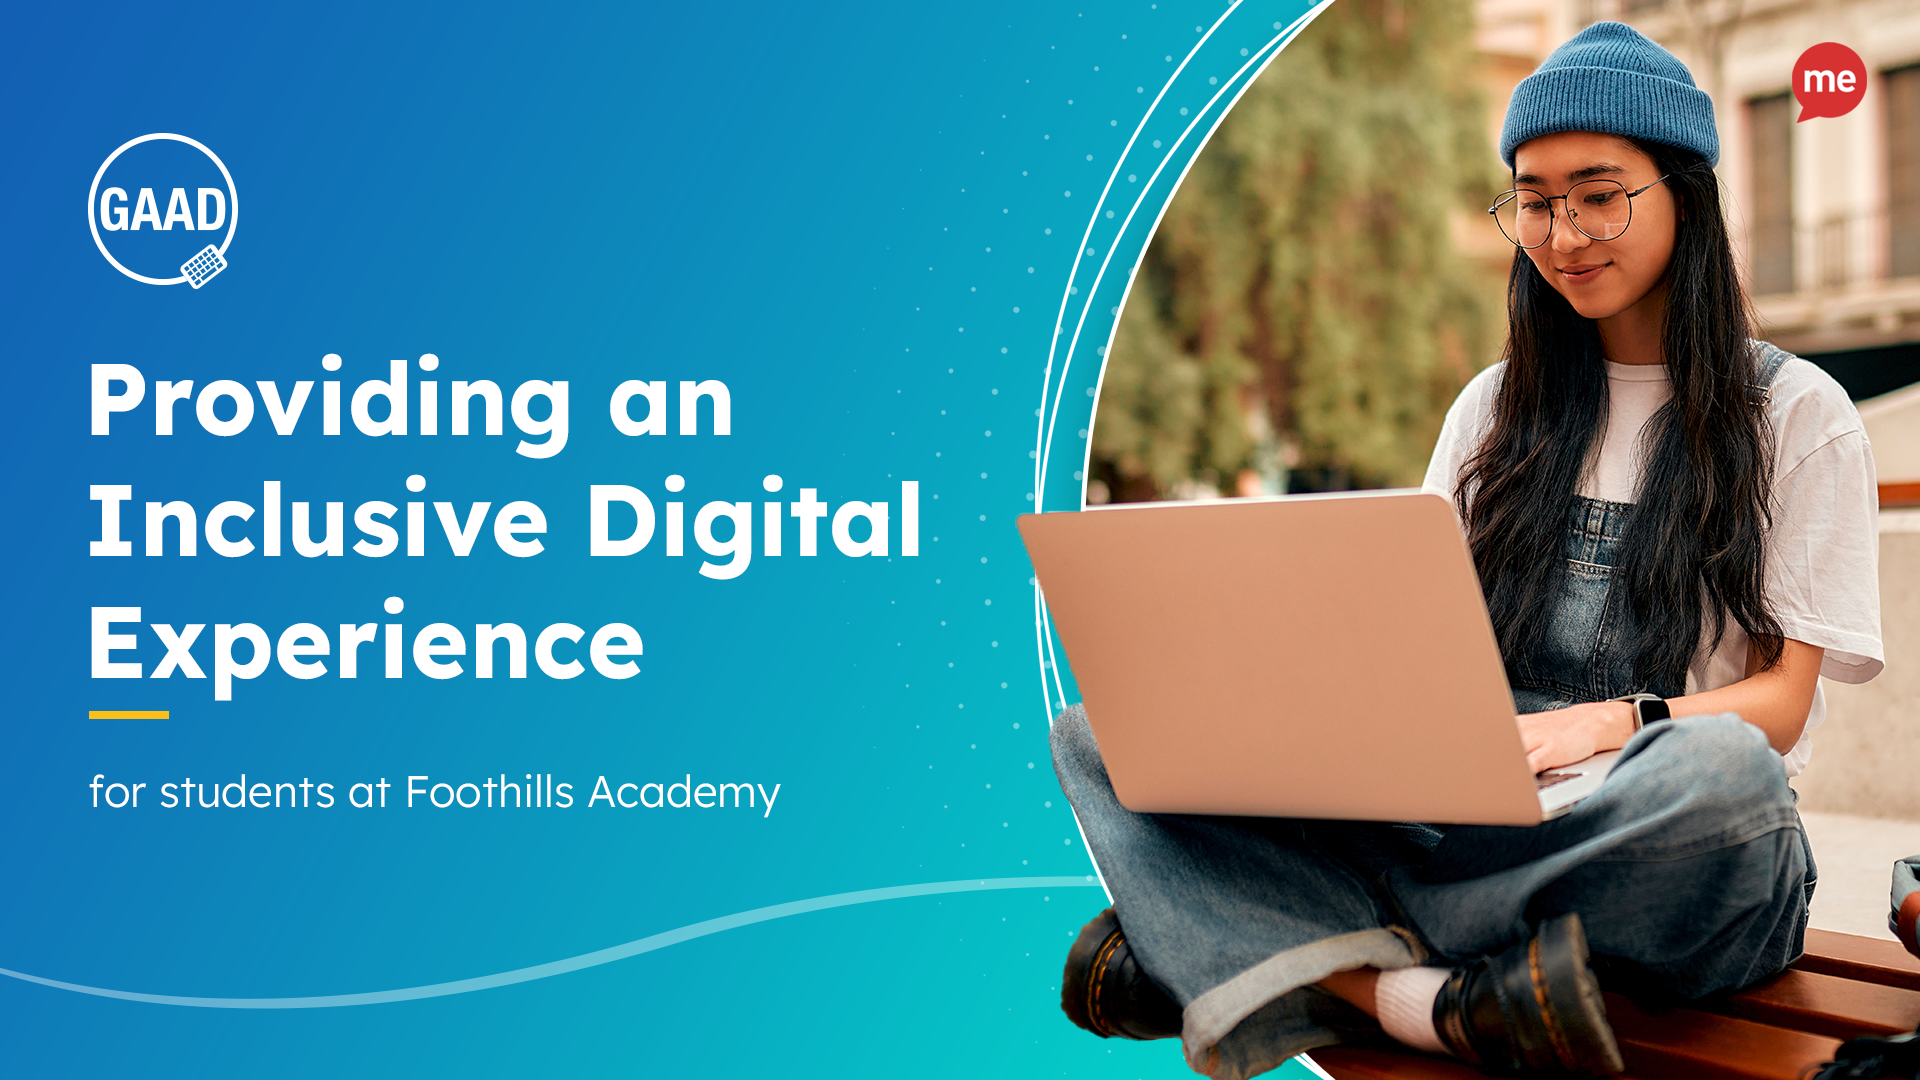 Providing an Inclusive Digital Experience for Students at Foothills Academy with an image of a young woman wearing a beanie and glasses sitting on top of a bench on her laptop